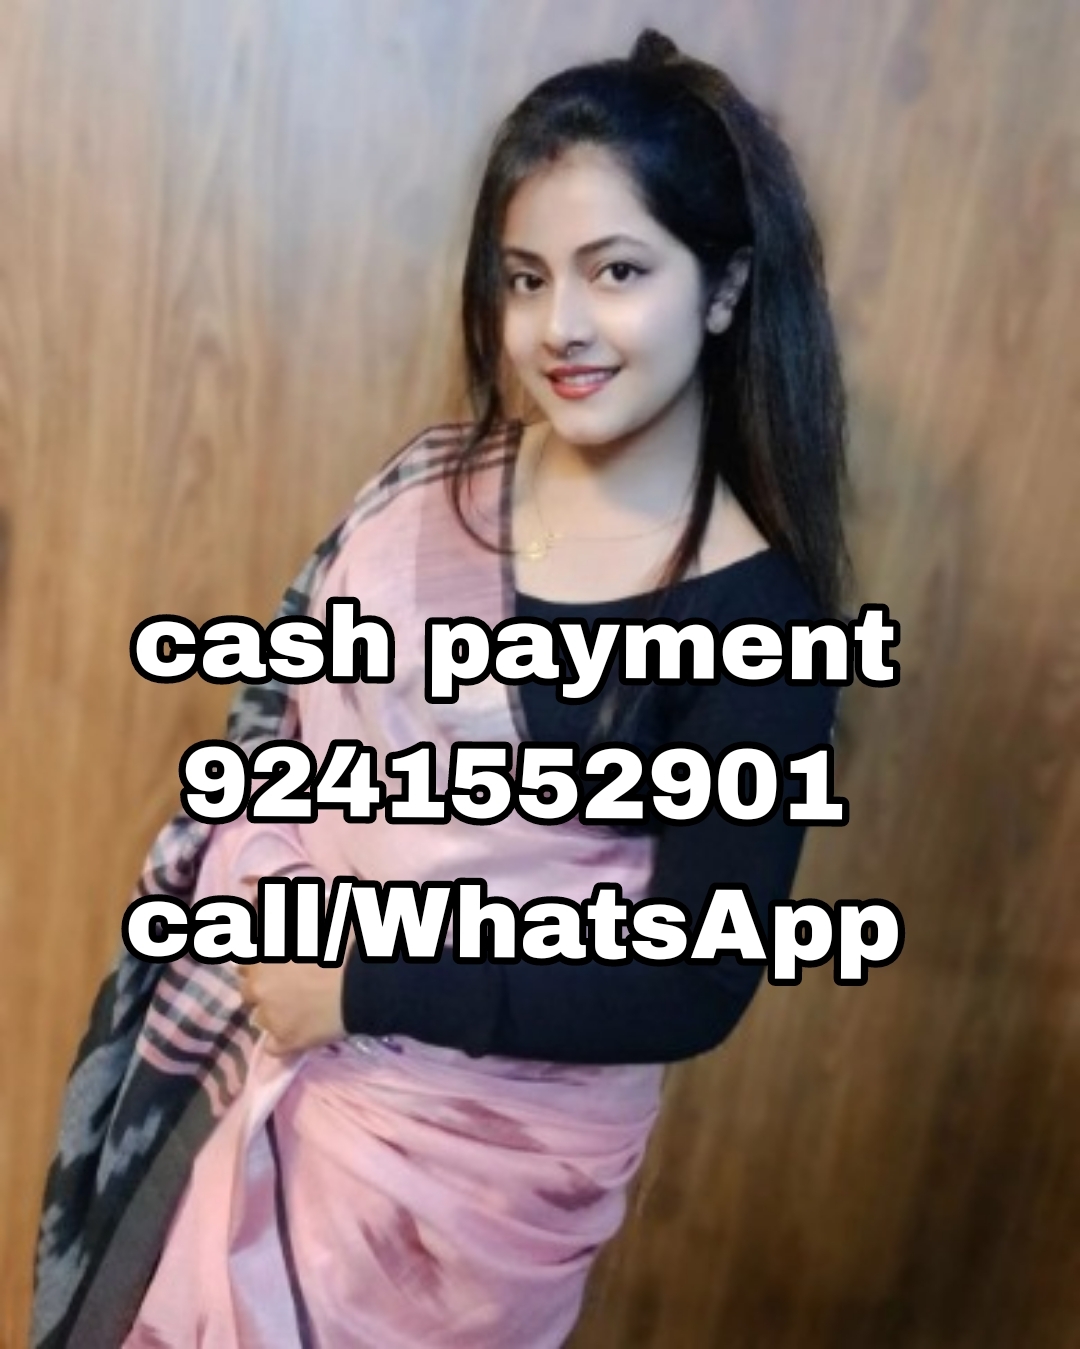 AHMEDABAD IN BEST SERVICE LOW PRICE GENUINE SERVICE AVAILABLE ANYTIME 